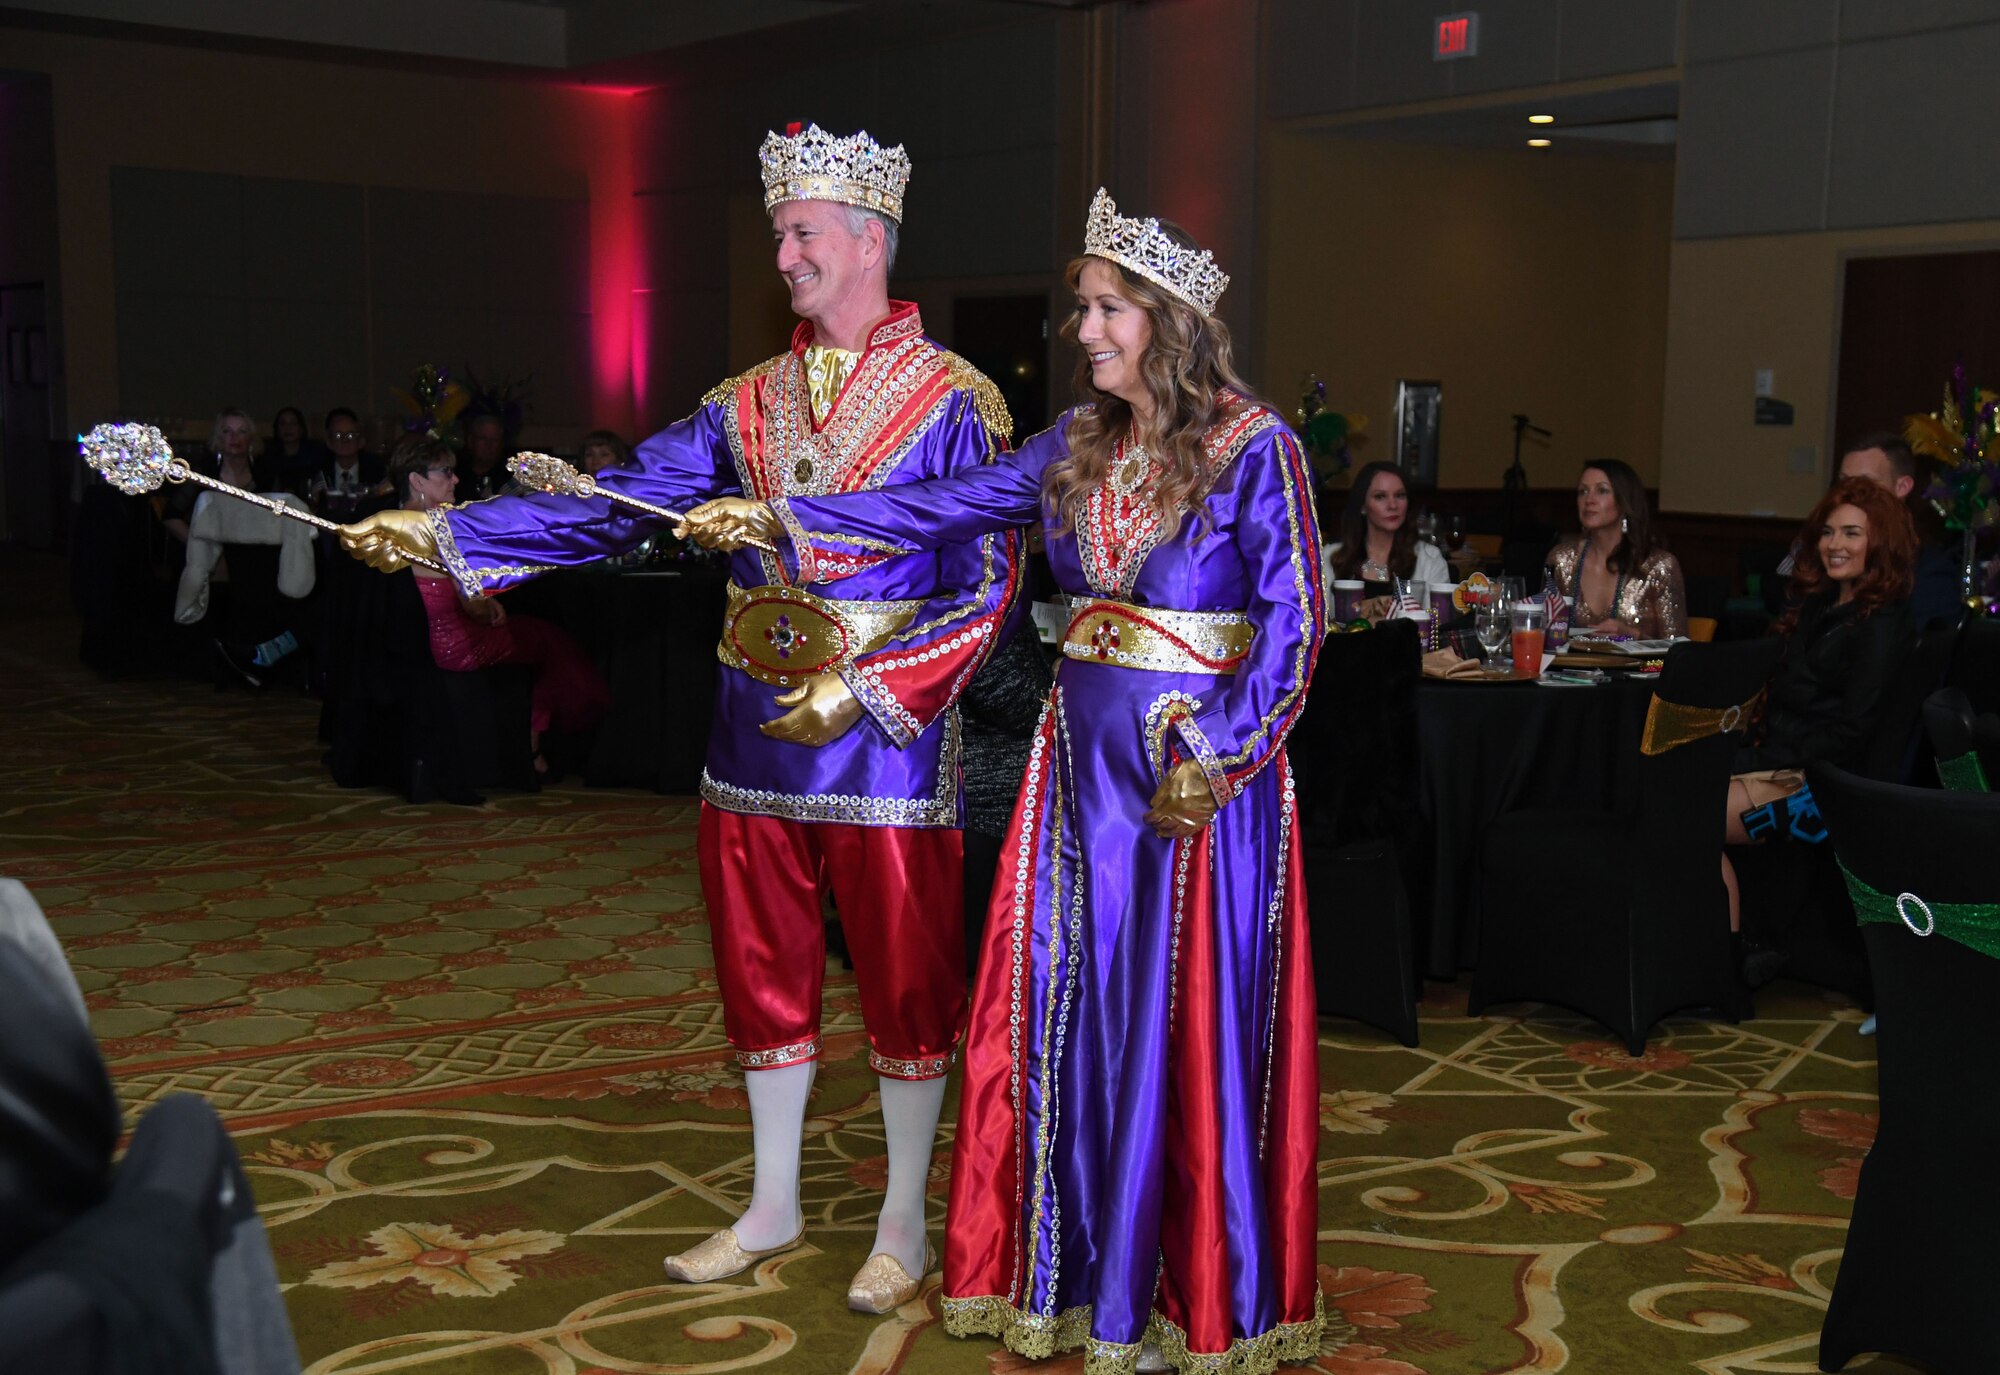 Visiting royalty from the Krewe of Gemini, Michael Schlett (King Jupiter LIII) and Sandi Schlett (Queen Leda LIII) participate in the 32nd Annual Krewe of Medics Mardi Gras Ball at the Bay Breeze Event Center on Keesler Air Force Base, Mississippi, Feb. 11, 2023.